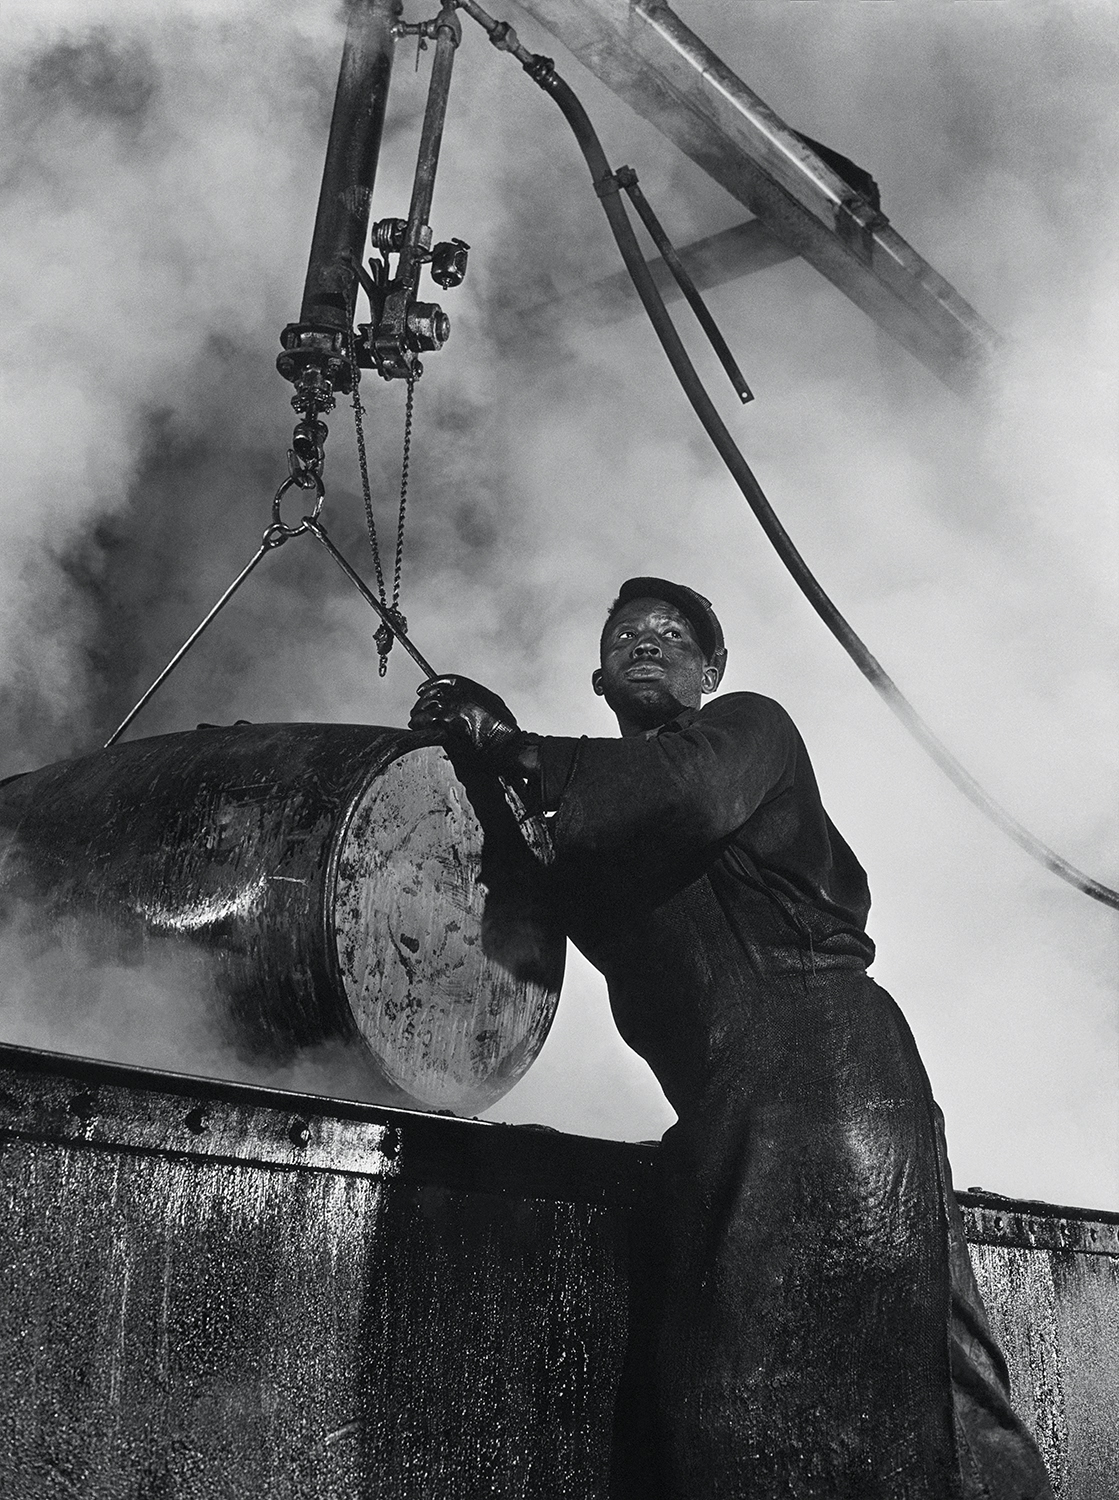 The cooper’s room where the large drums and containers are reconditioned. Here a workman lifts a drum from a boiling lye solution which has cleaned from it grease and dust particles photo by Gordon Parks